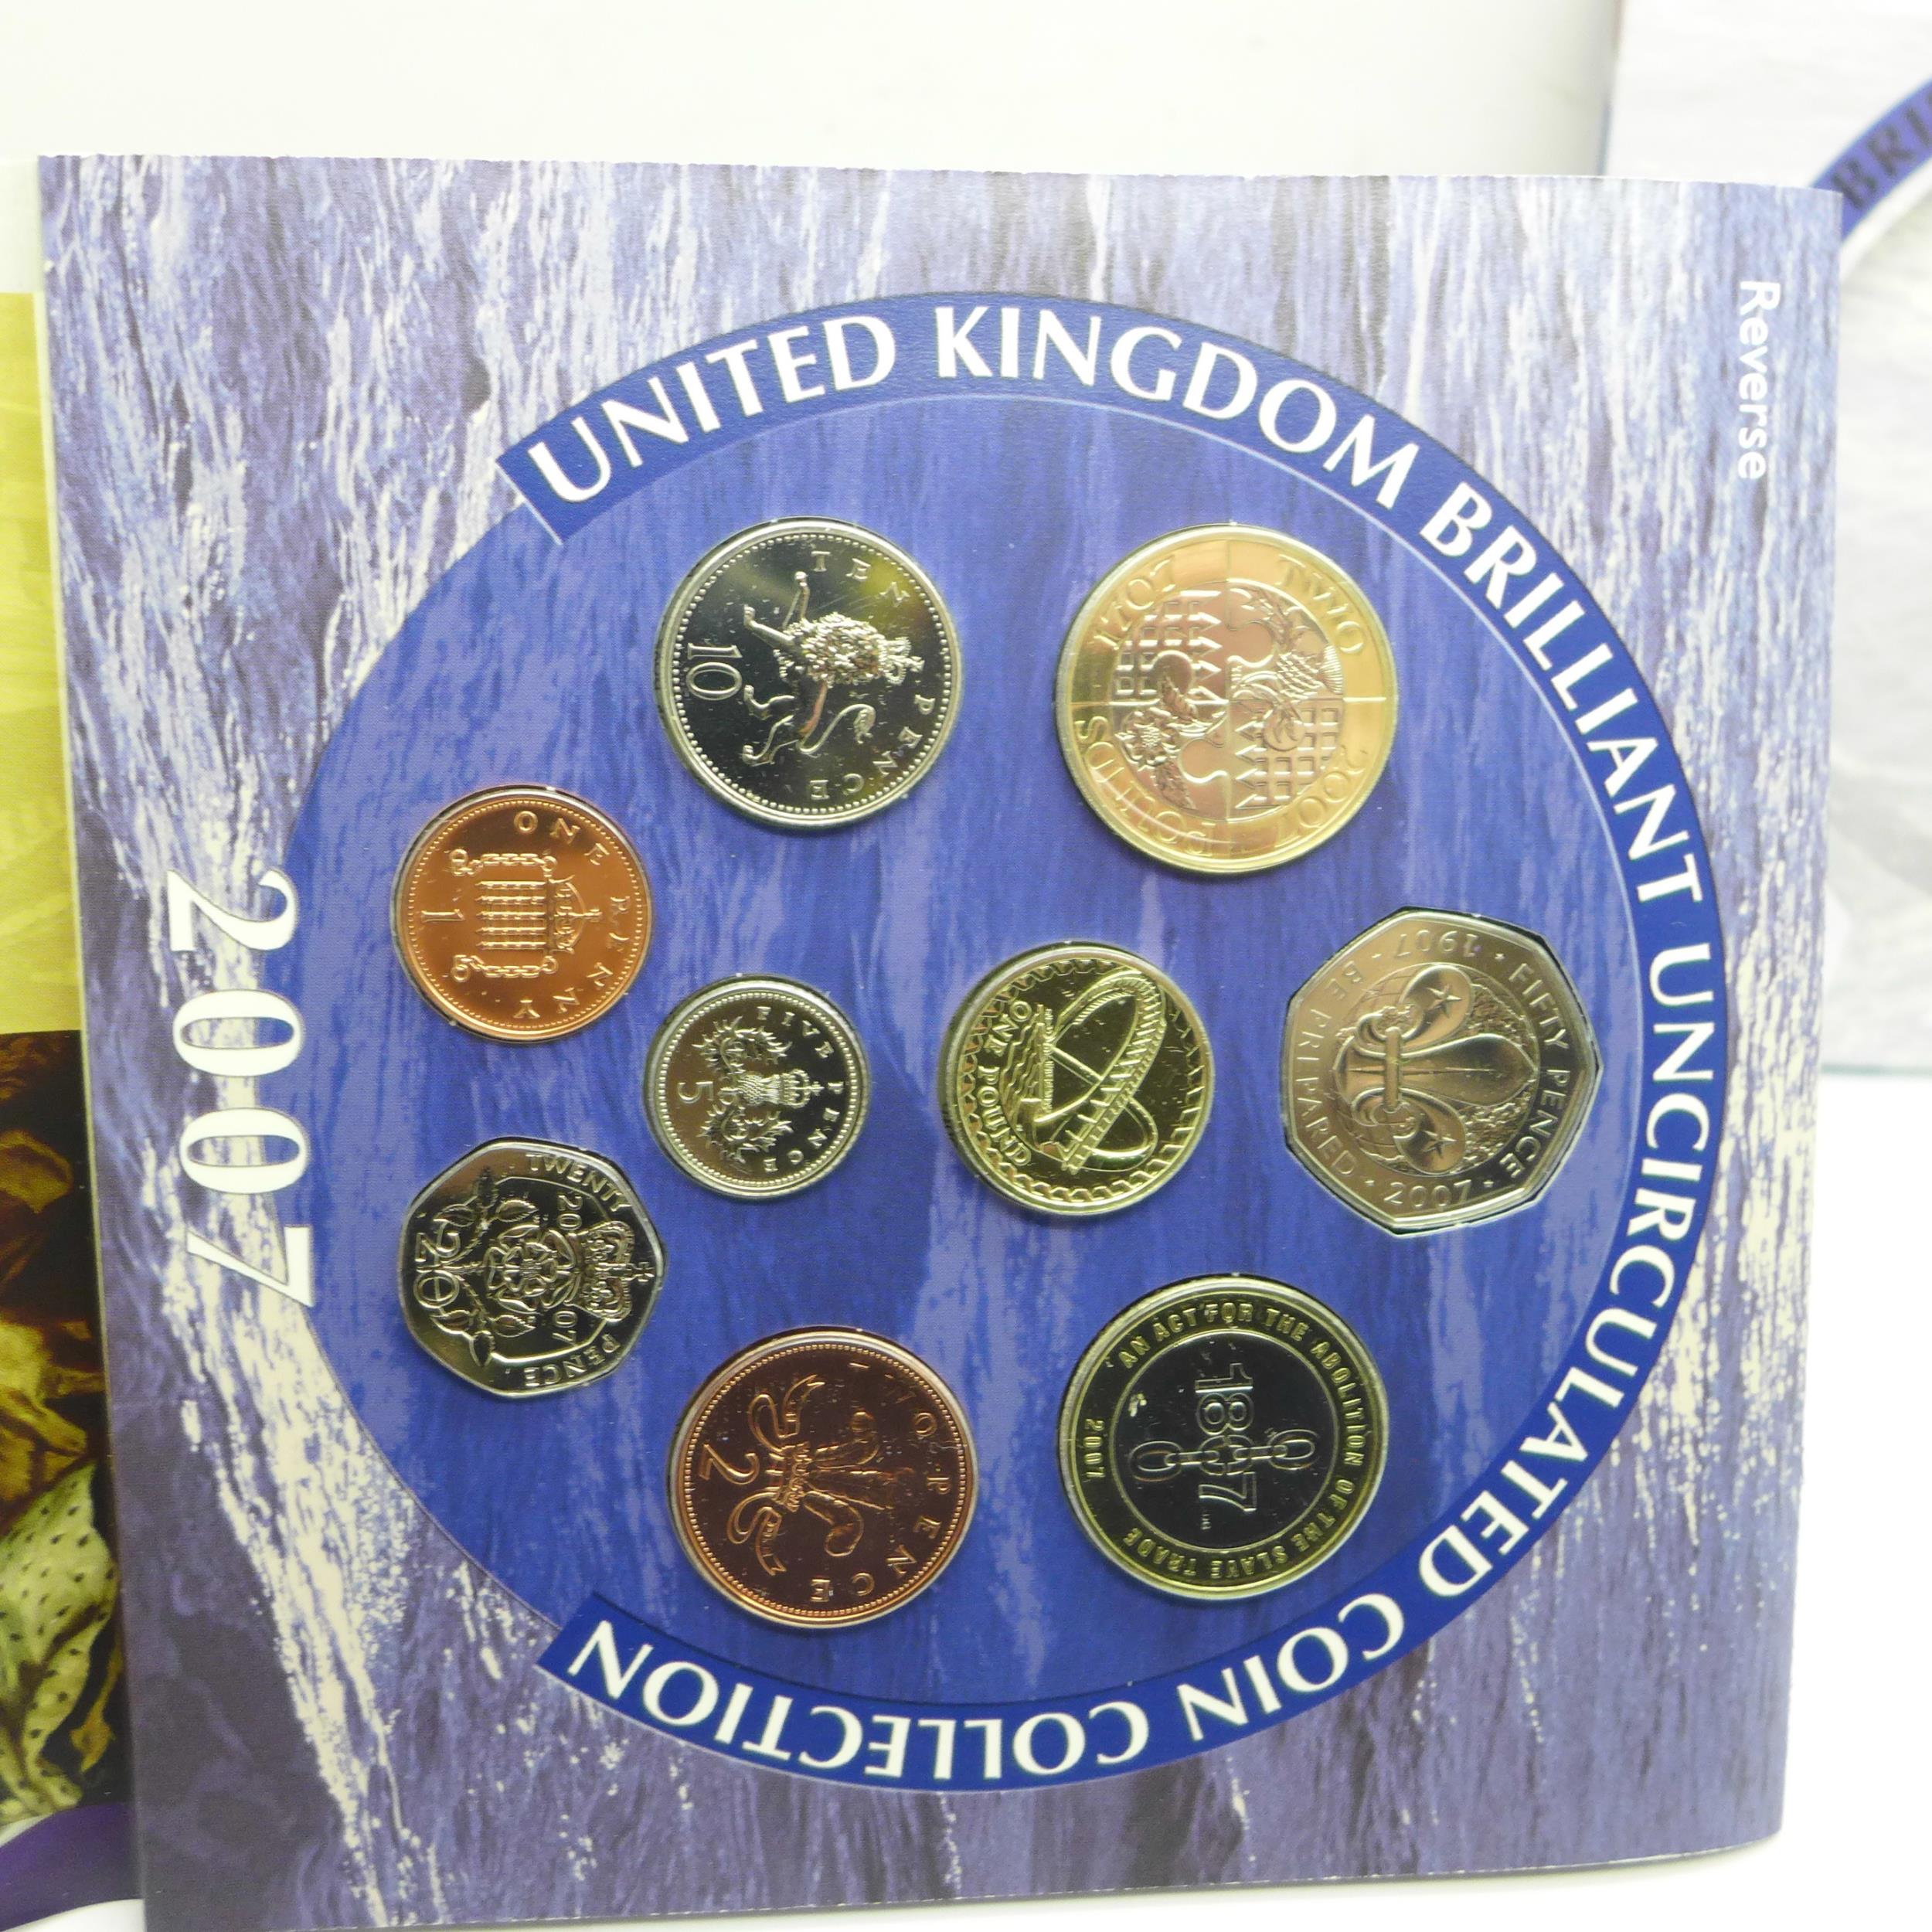 A Royal Mint 2007 United Kingdom Brilliant Uncirculated Coin Collection - Image 4 of 4